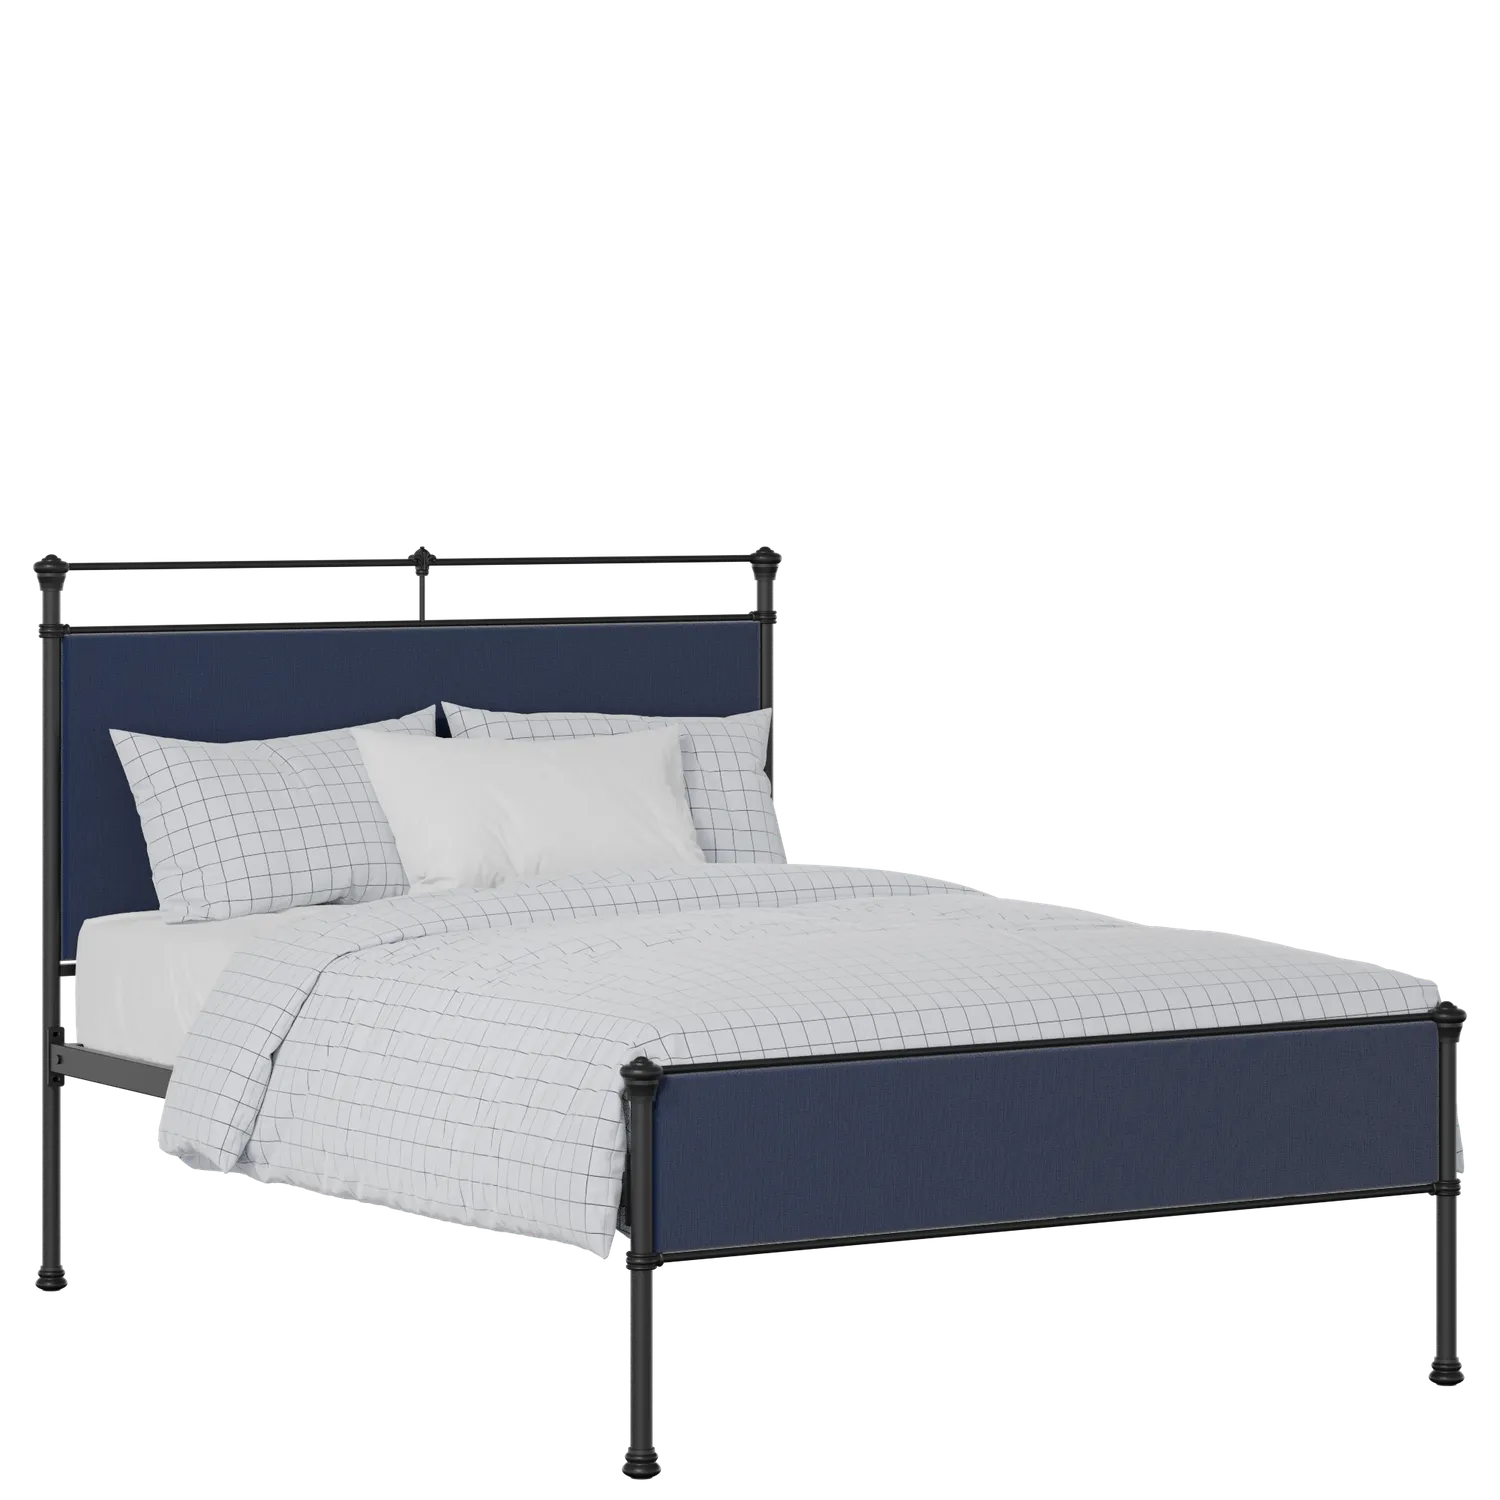 Nancy Slim iron/metal upholstered bed in black with blue fabric